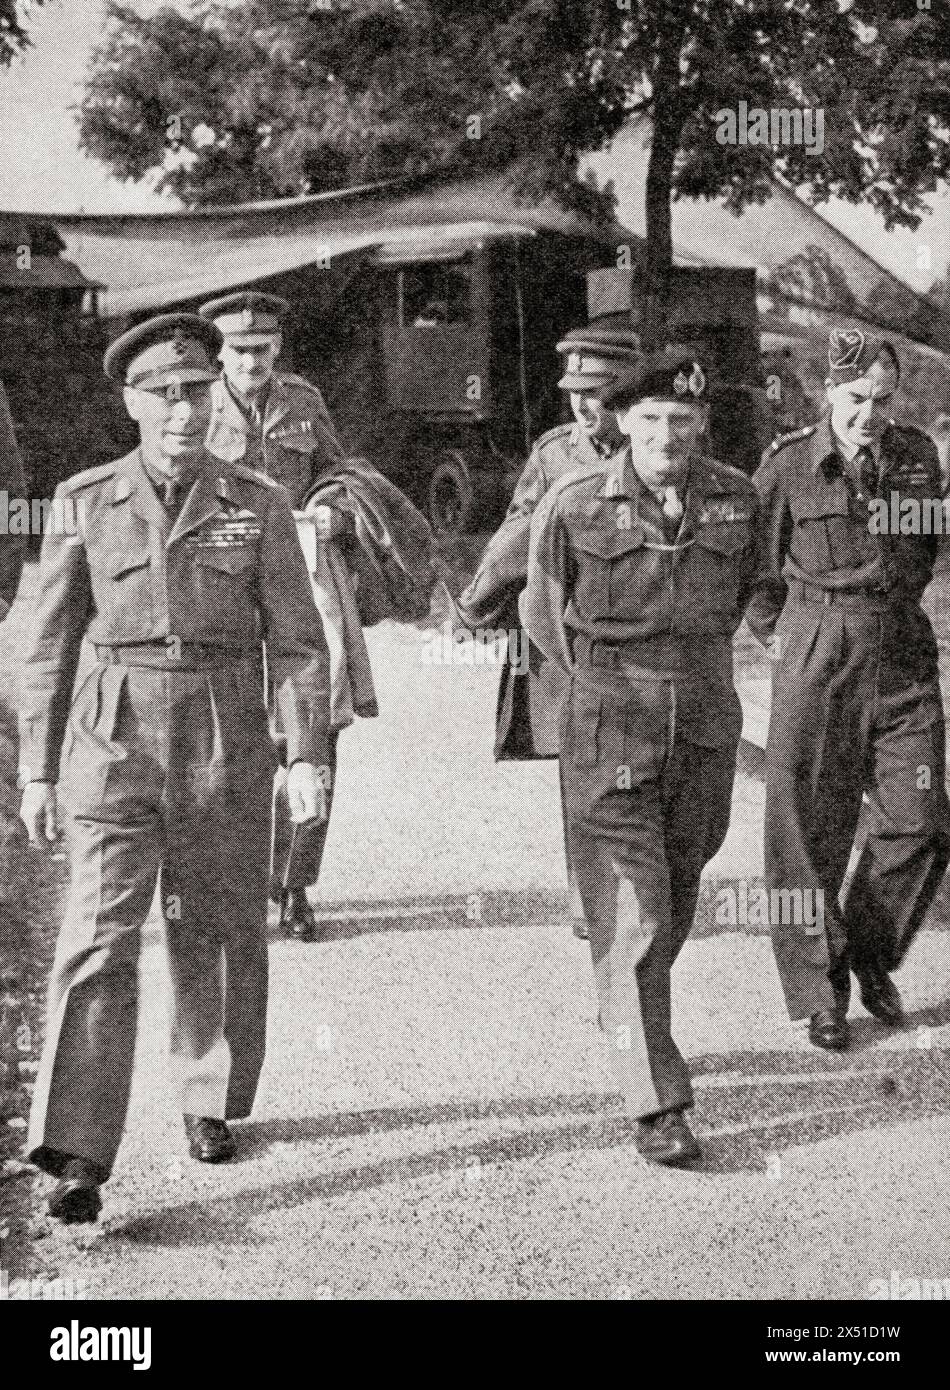 King George VI on his royal tour of the battle areas in Western Europe during WWII, 1944, seen here leaving British headquarters with Field Marshal Montgomery.  George VI, 1895 – 1952. King of the United Kingdom.  Field Marshal Bernard Law Montgomery, 1st Viscount Montgomery of Alamein, 1887 – 1976, aka Monty and The Spartan General.   Senior British Army officer.  From The War in Pictures, Sixth Year. Stock Photo